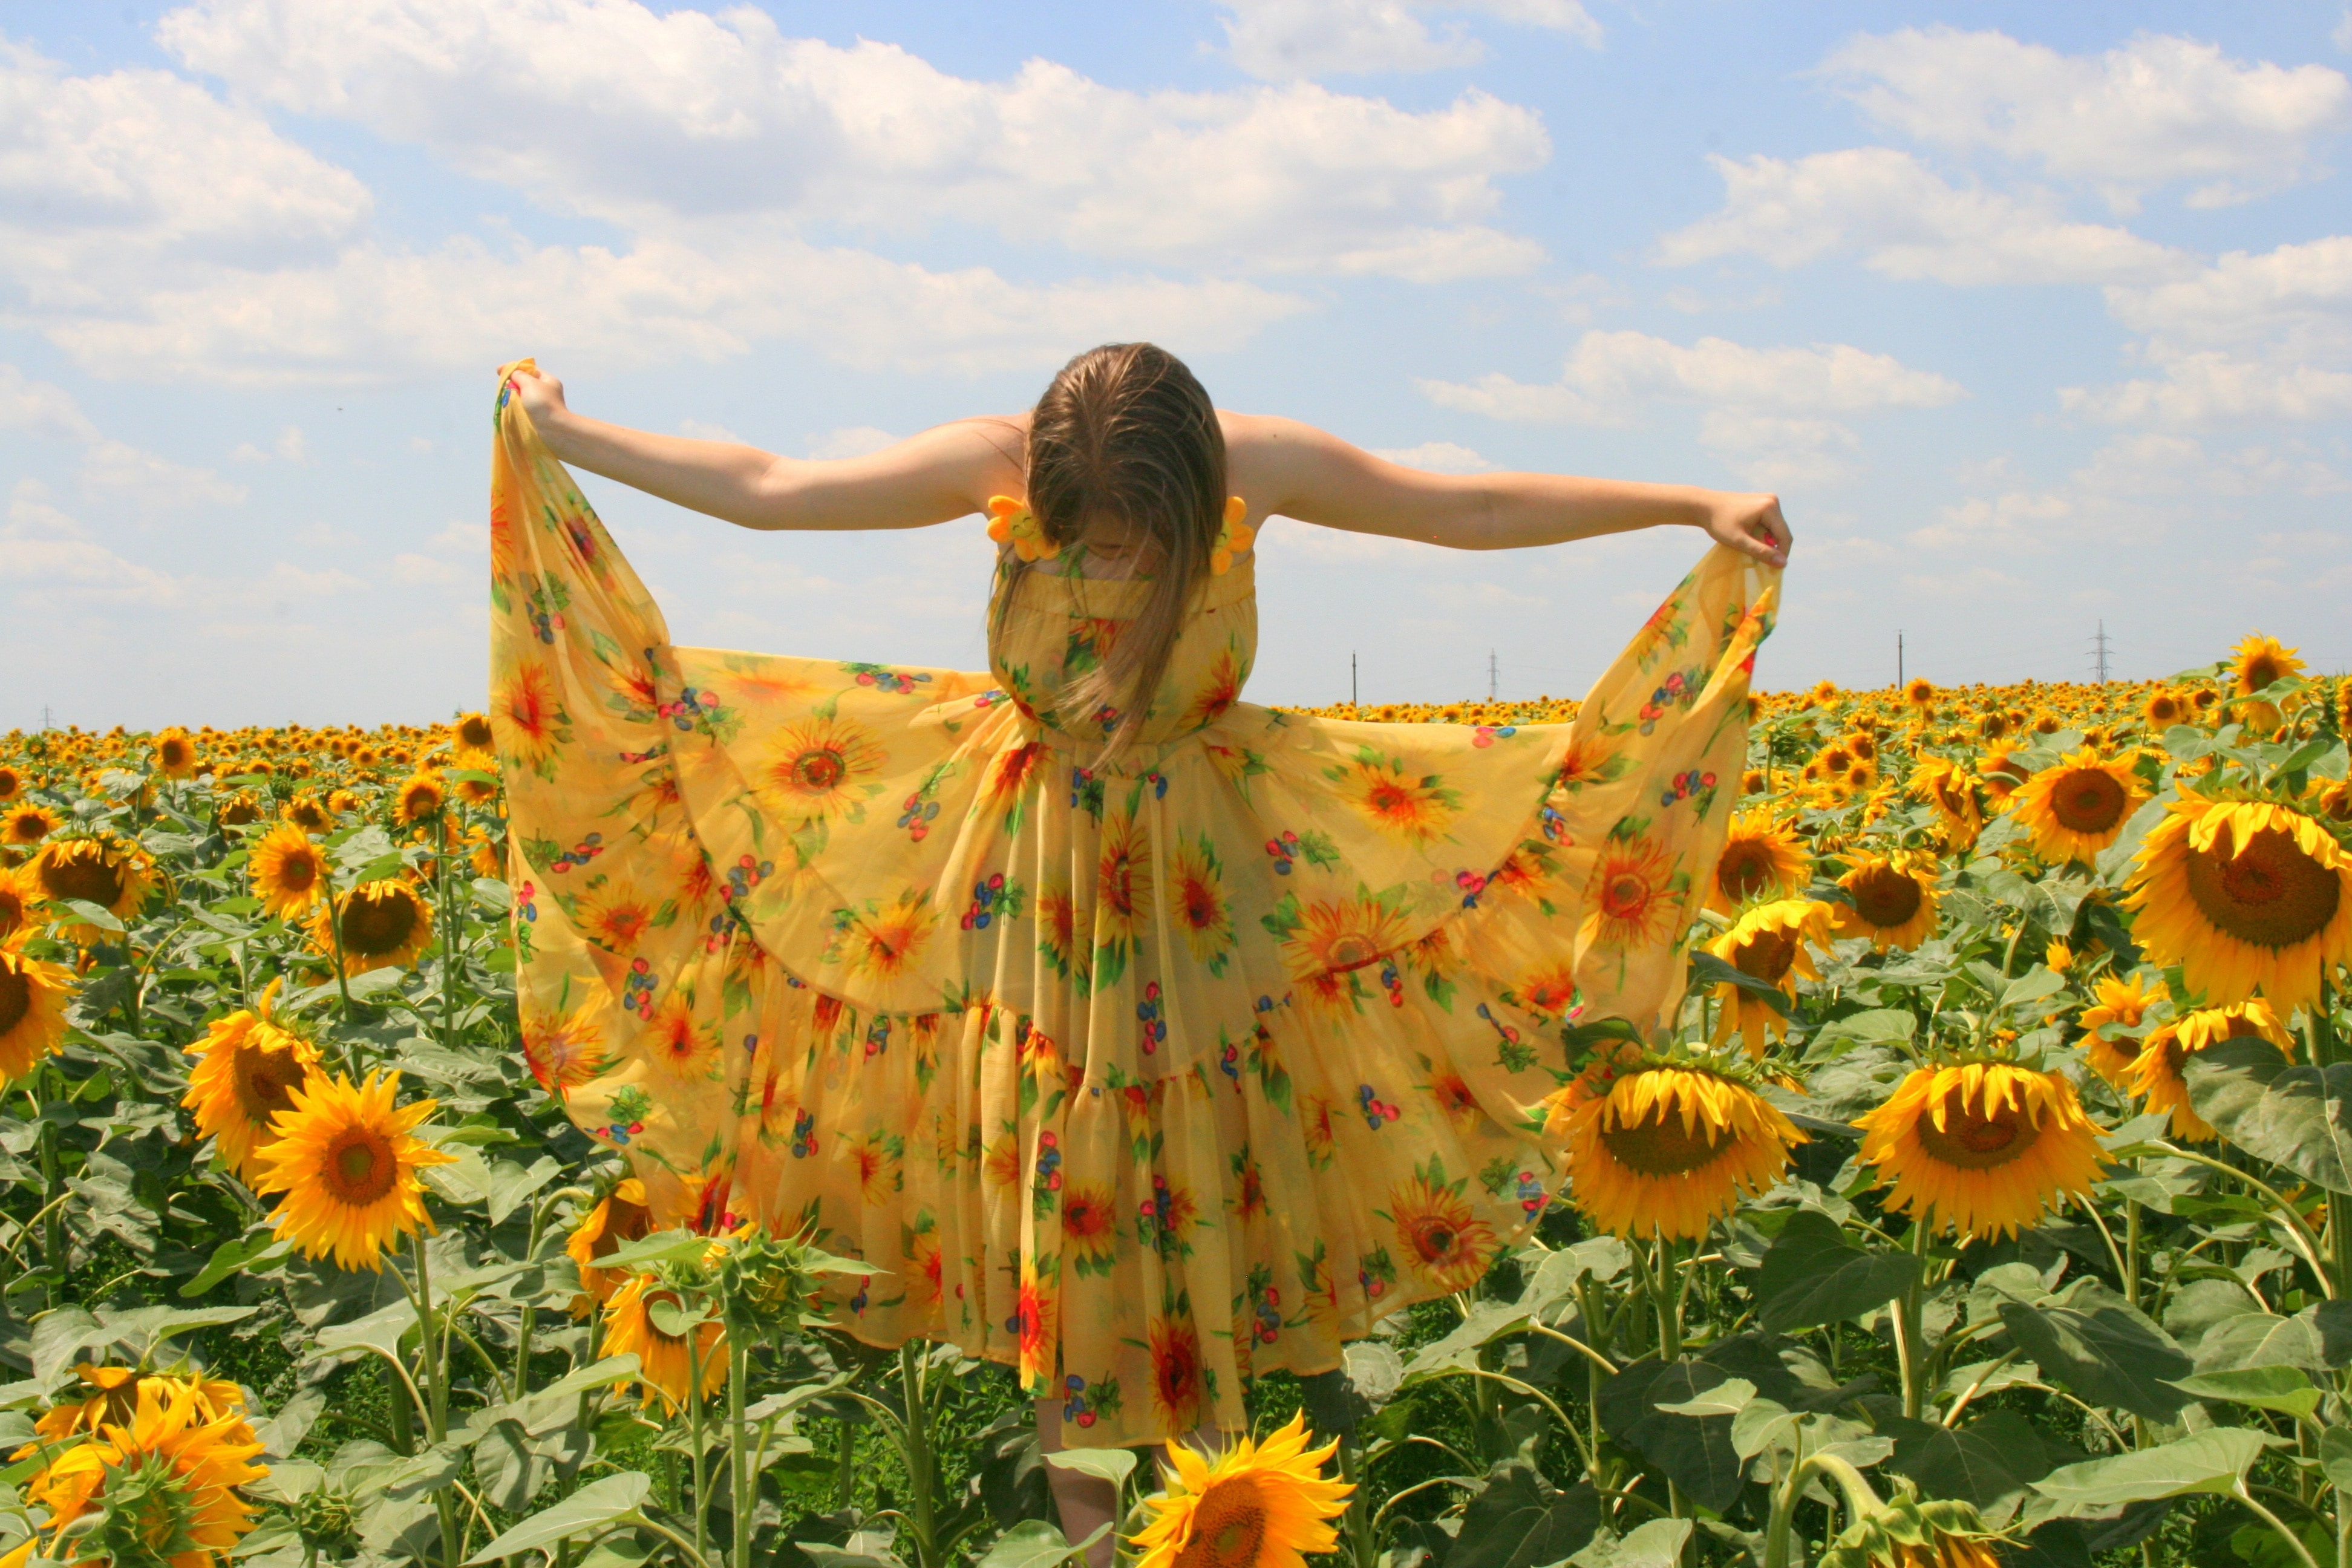 women  wearing   sunflower printed  dress standing in sunflower under cloudy weather during daytime